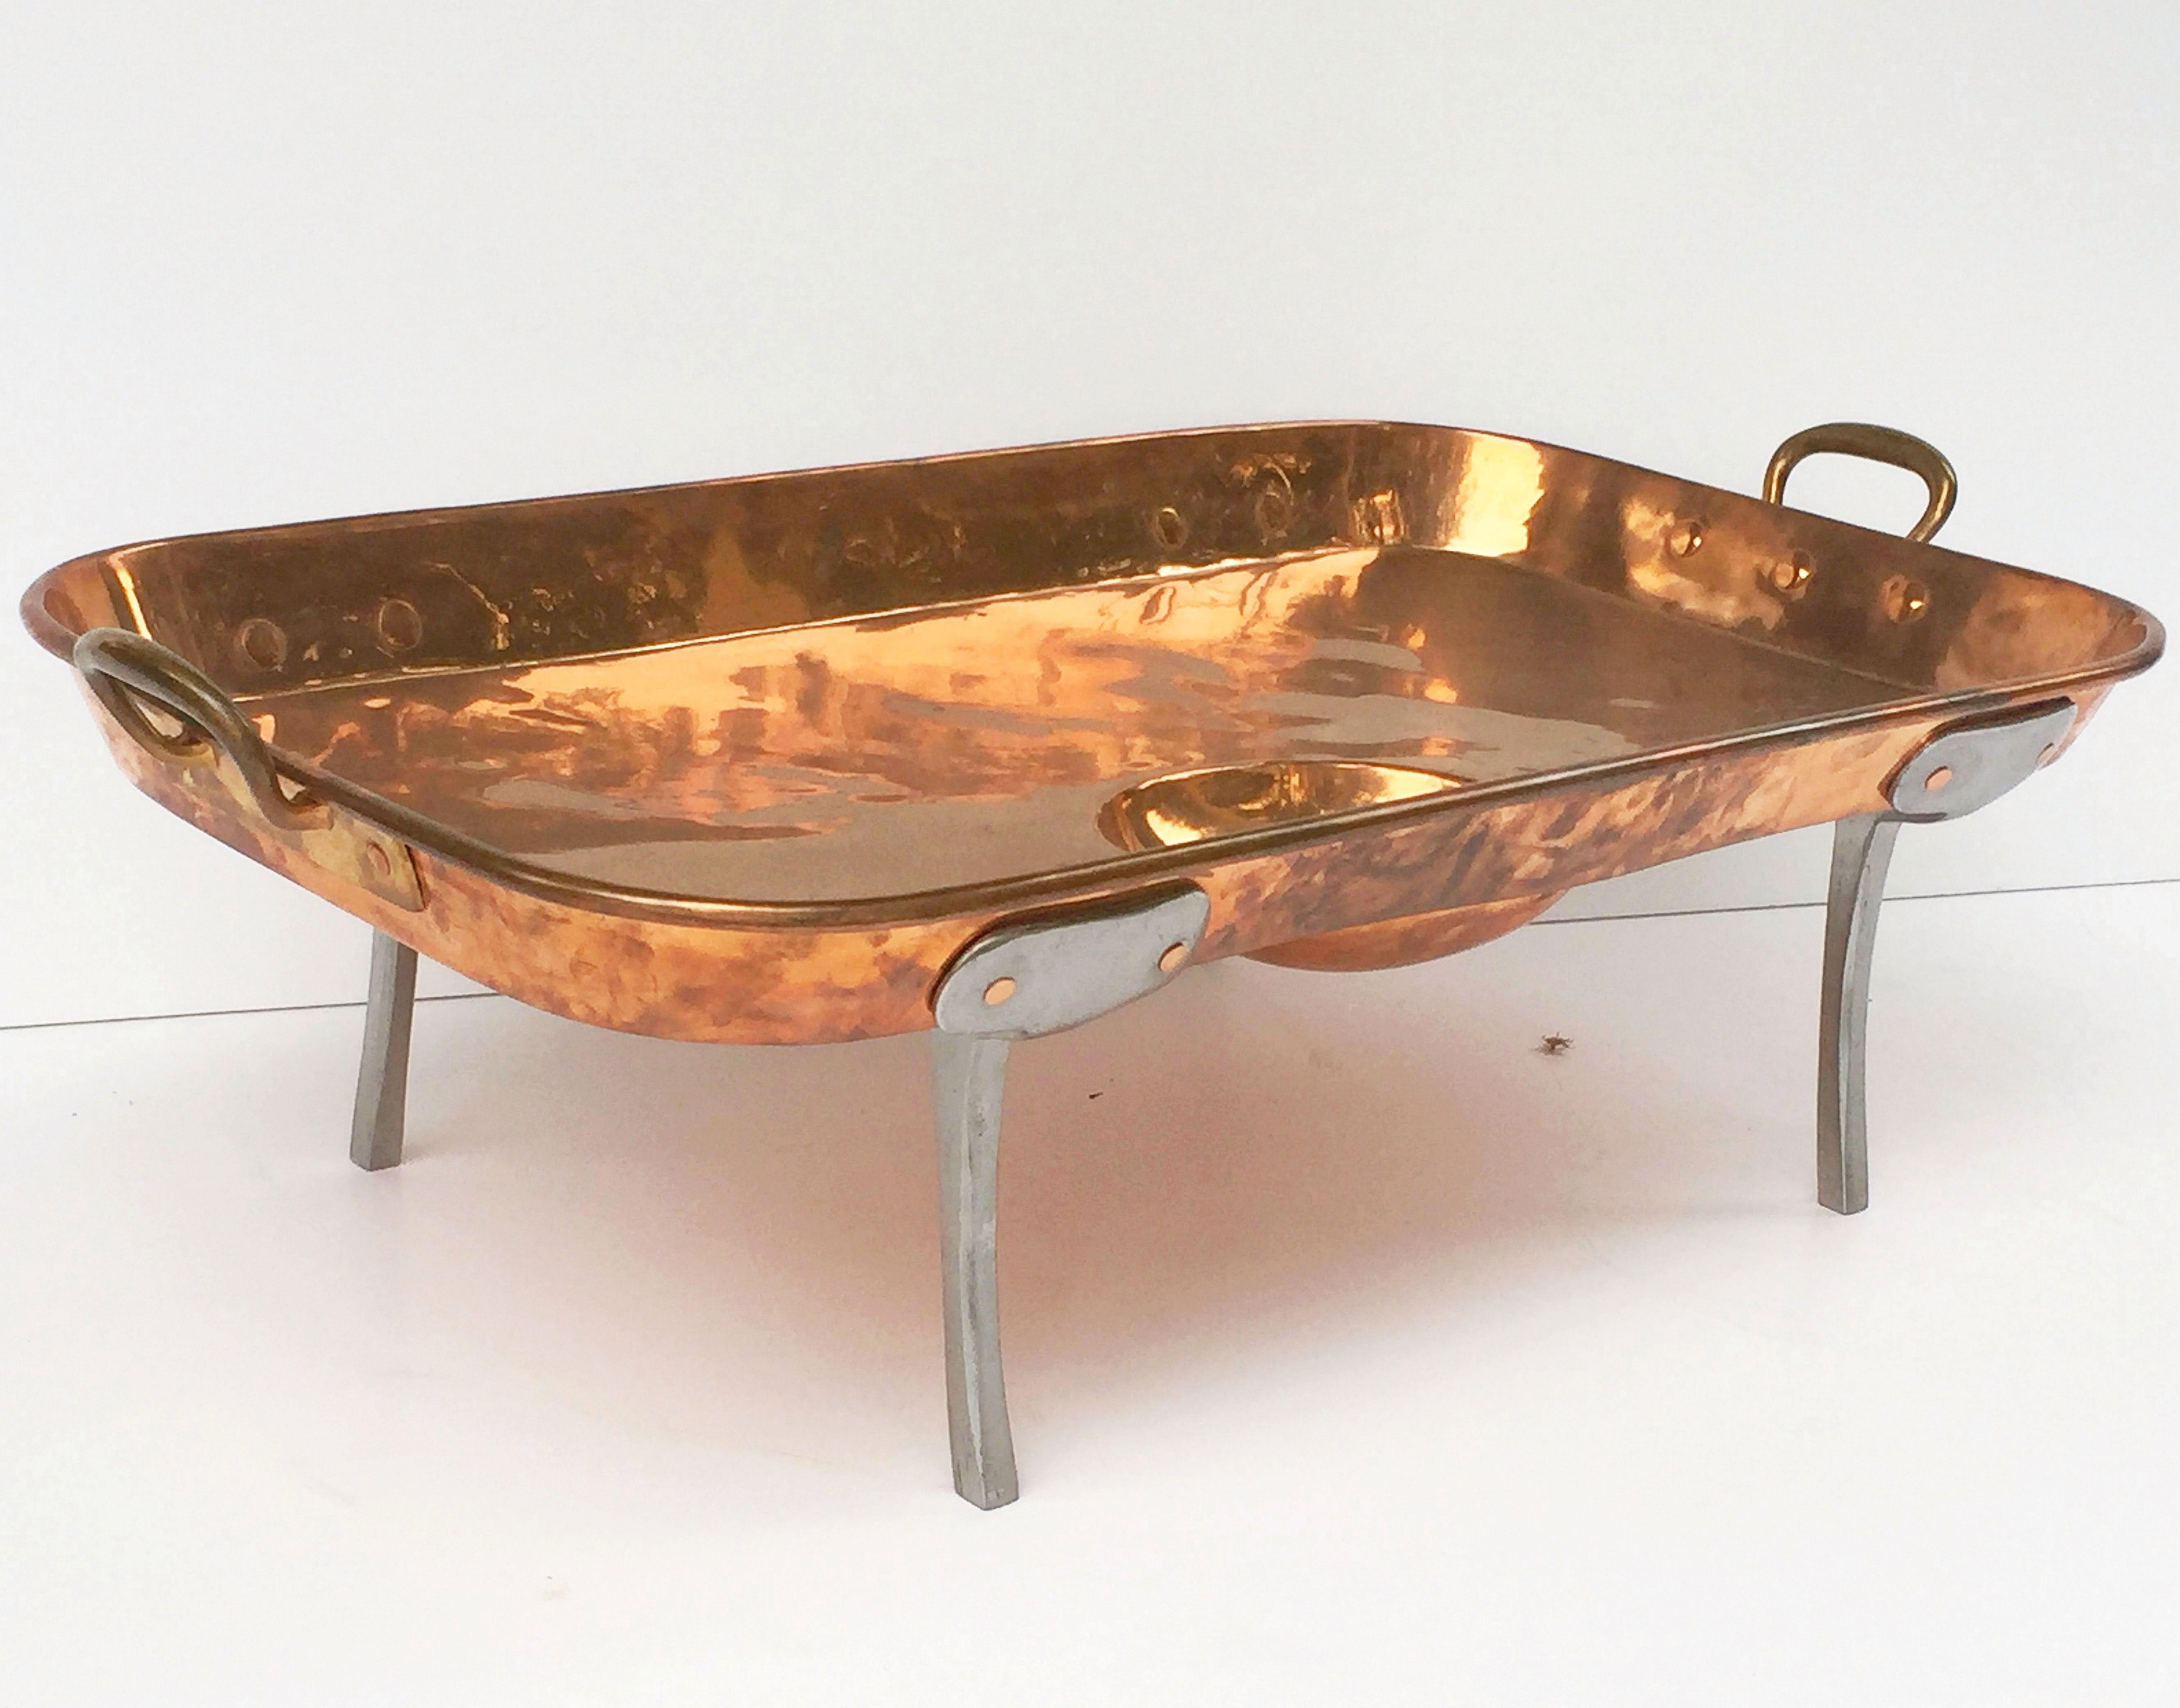 A handsome large English rectangular copper serving tray or platter with a well and two opposing handles, resting on four steel feet.